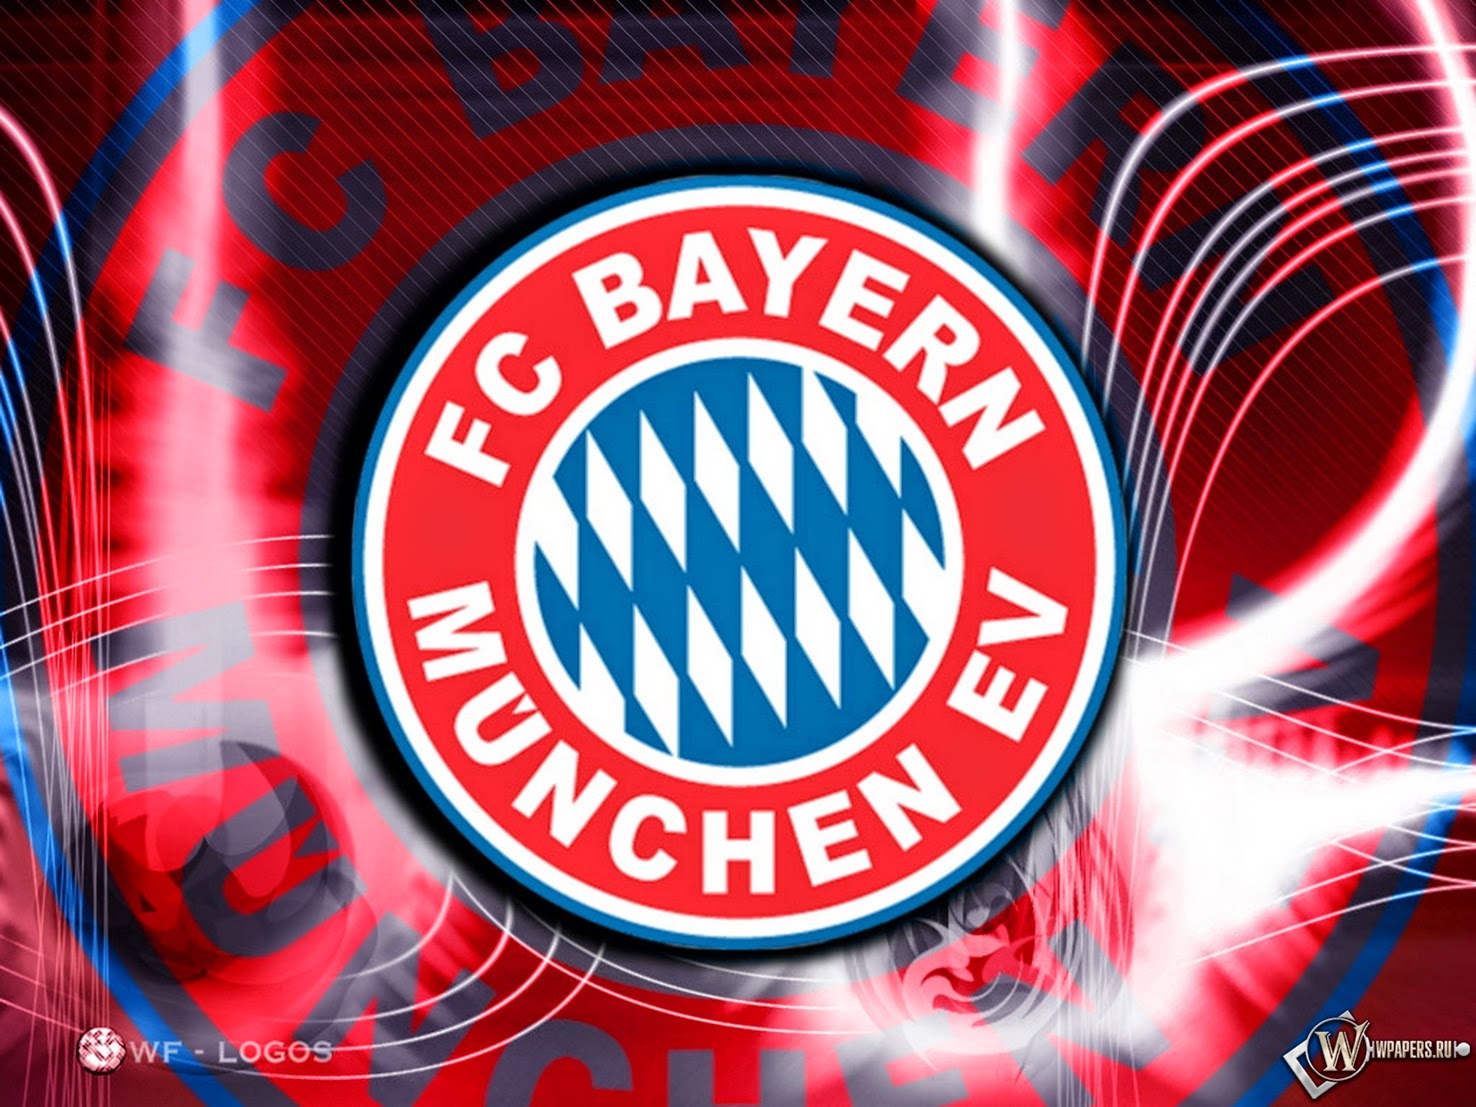 Download wallpapers Bayern Munchen FC golden logo Bundesliga red  abstract background soccer german football club Bayern Munchen logo  football Bayern Munchen Germany for desktop with resolution 2560x1600  High Quality HD pictures wallpapers